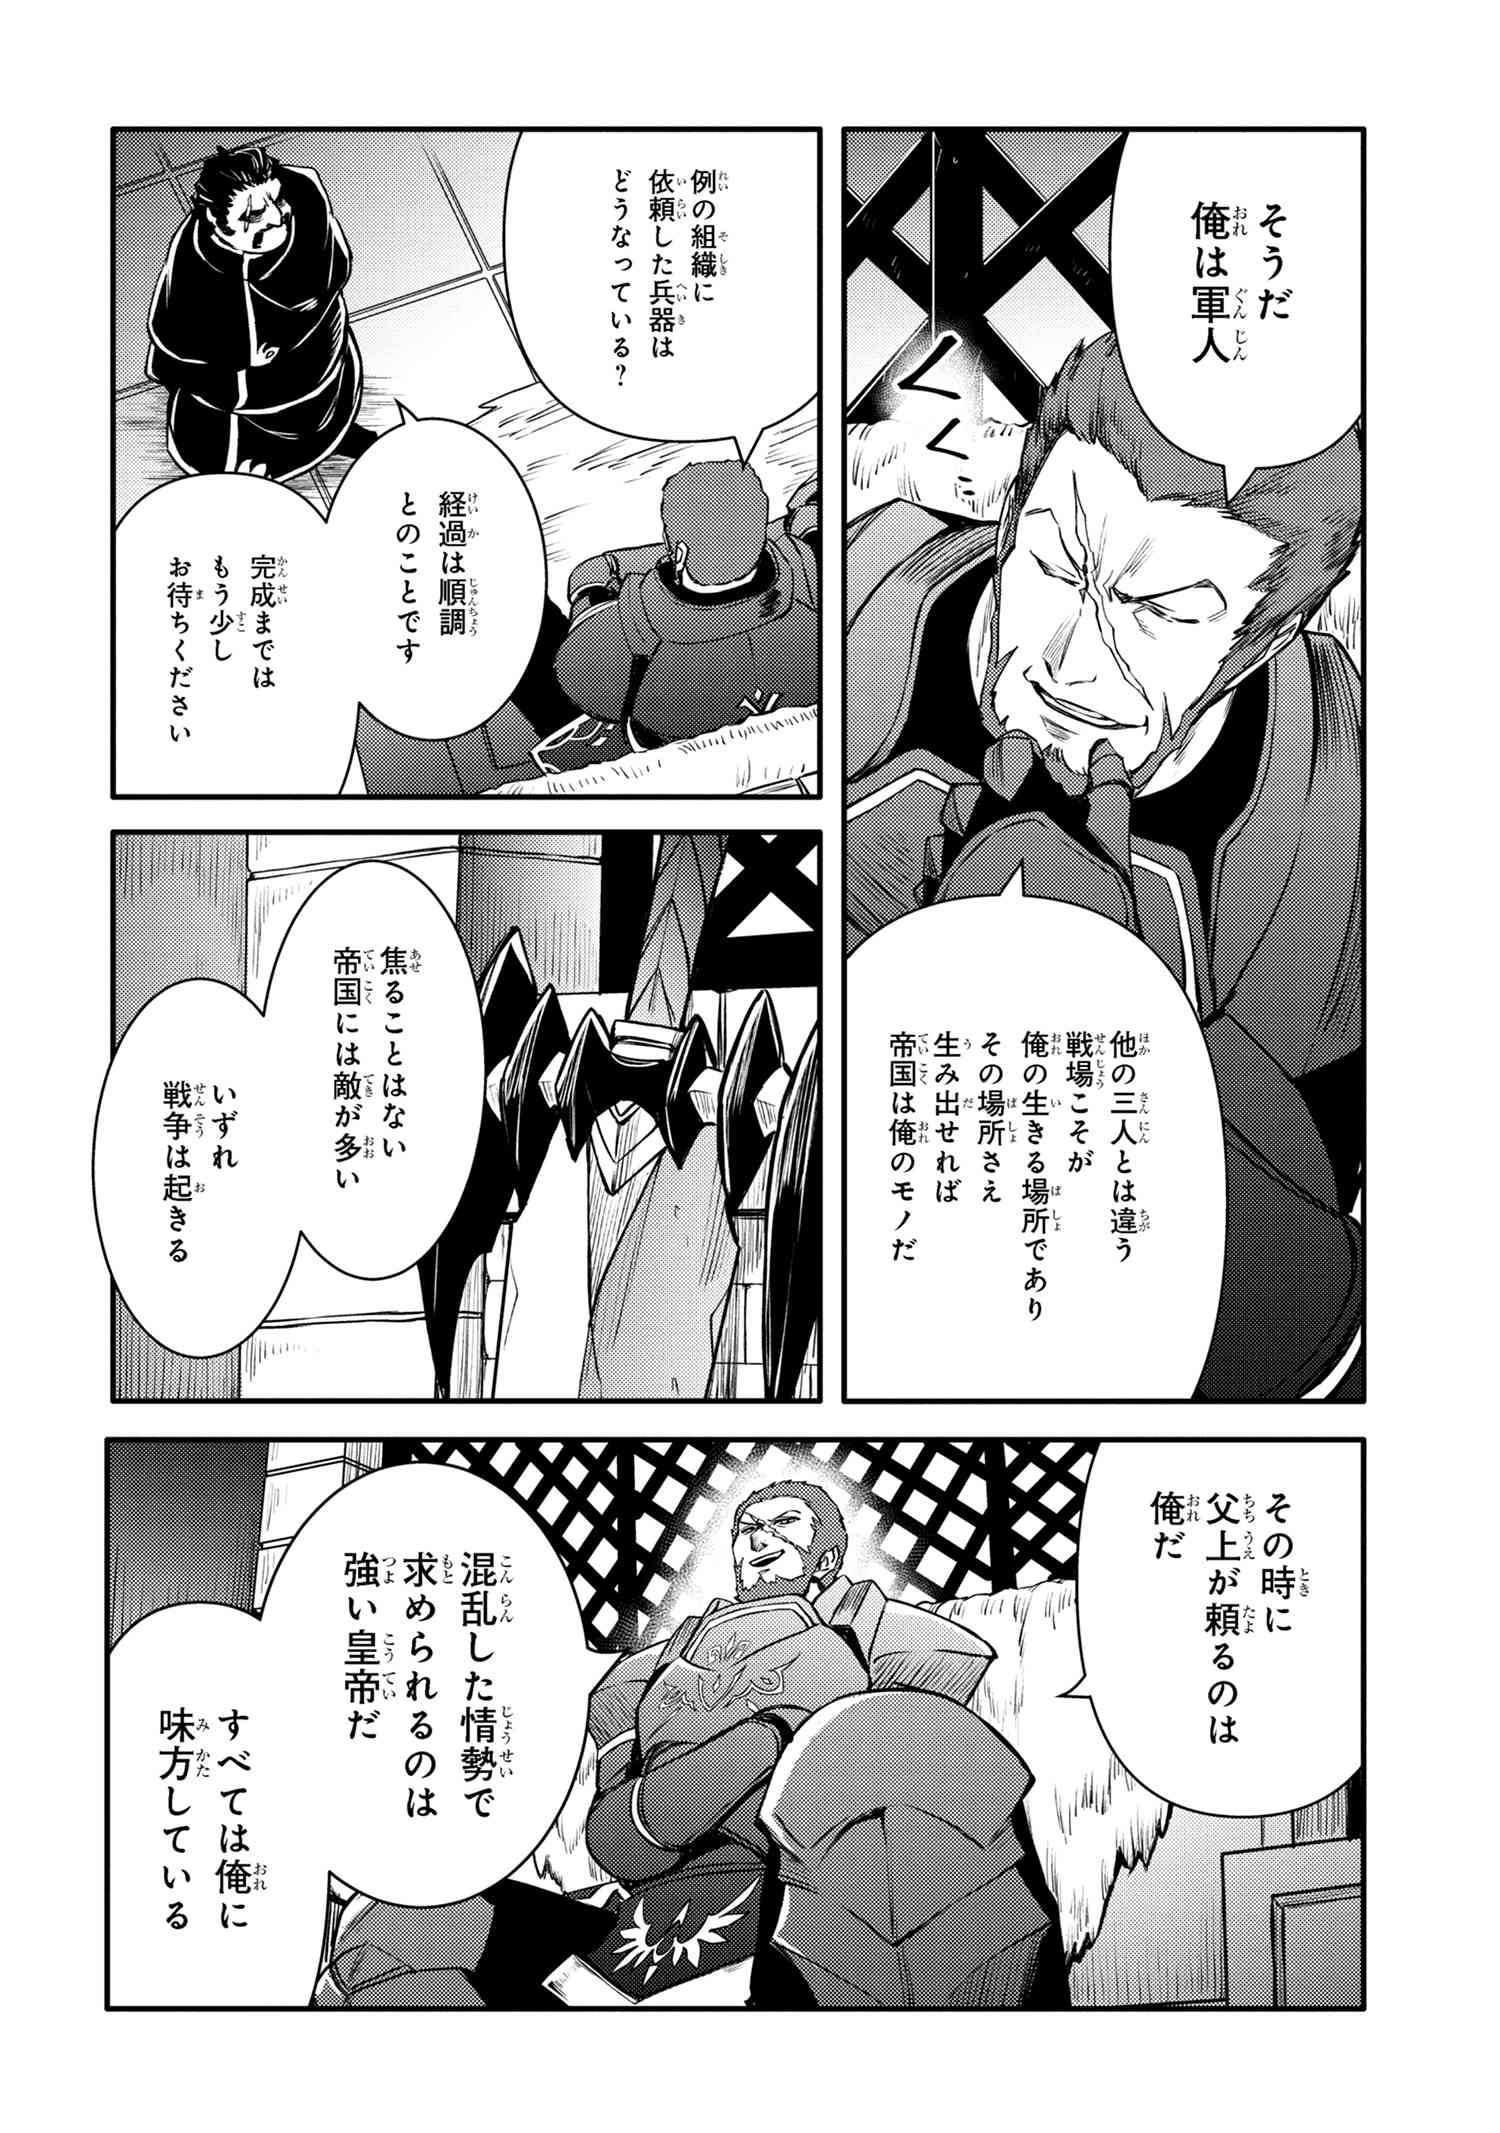 The Strongest Dull Prince’s Secret Battle for the Throne - Chapter 38.2 - Page 5